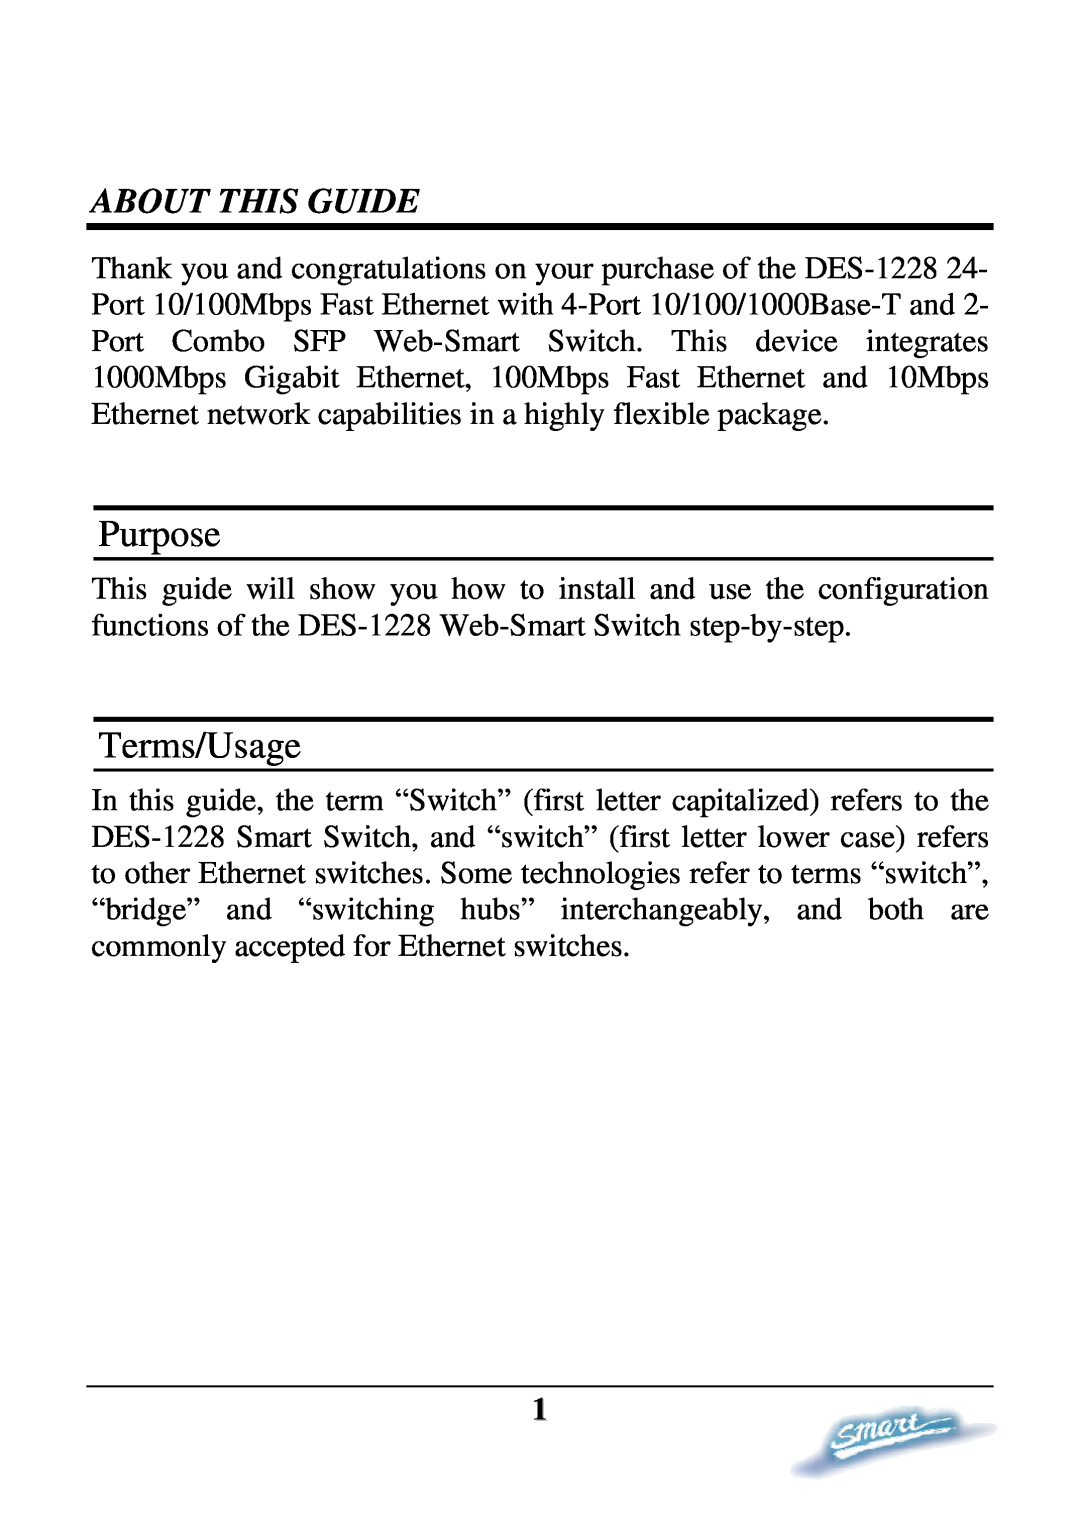 D-Link DES-1228 user manual Purpose, Terms/Usage, About This Guide 